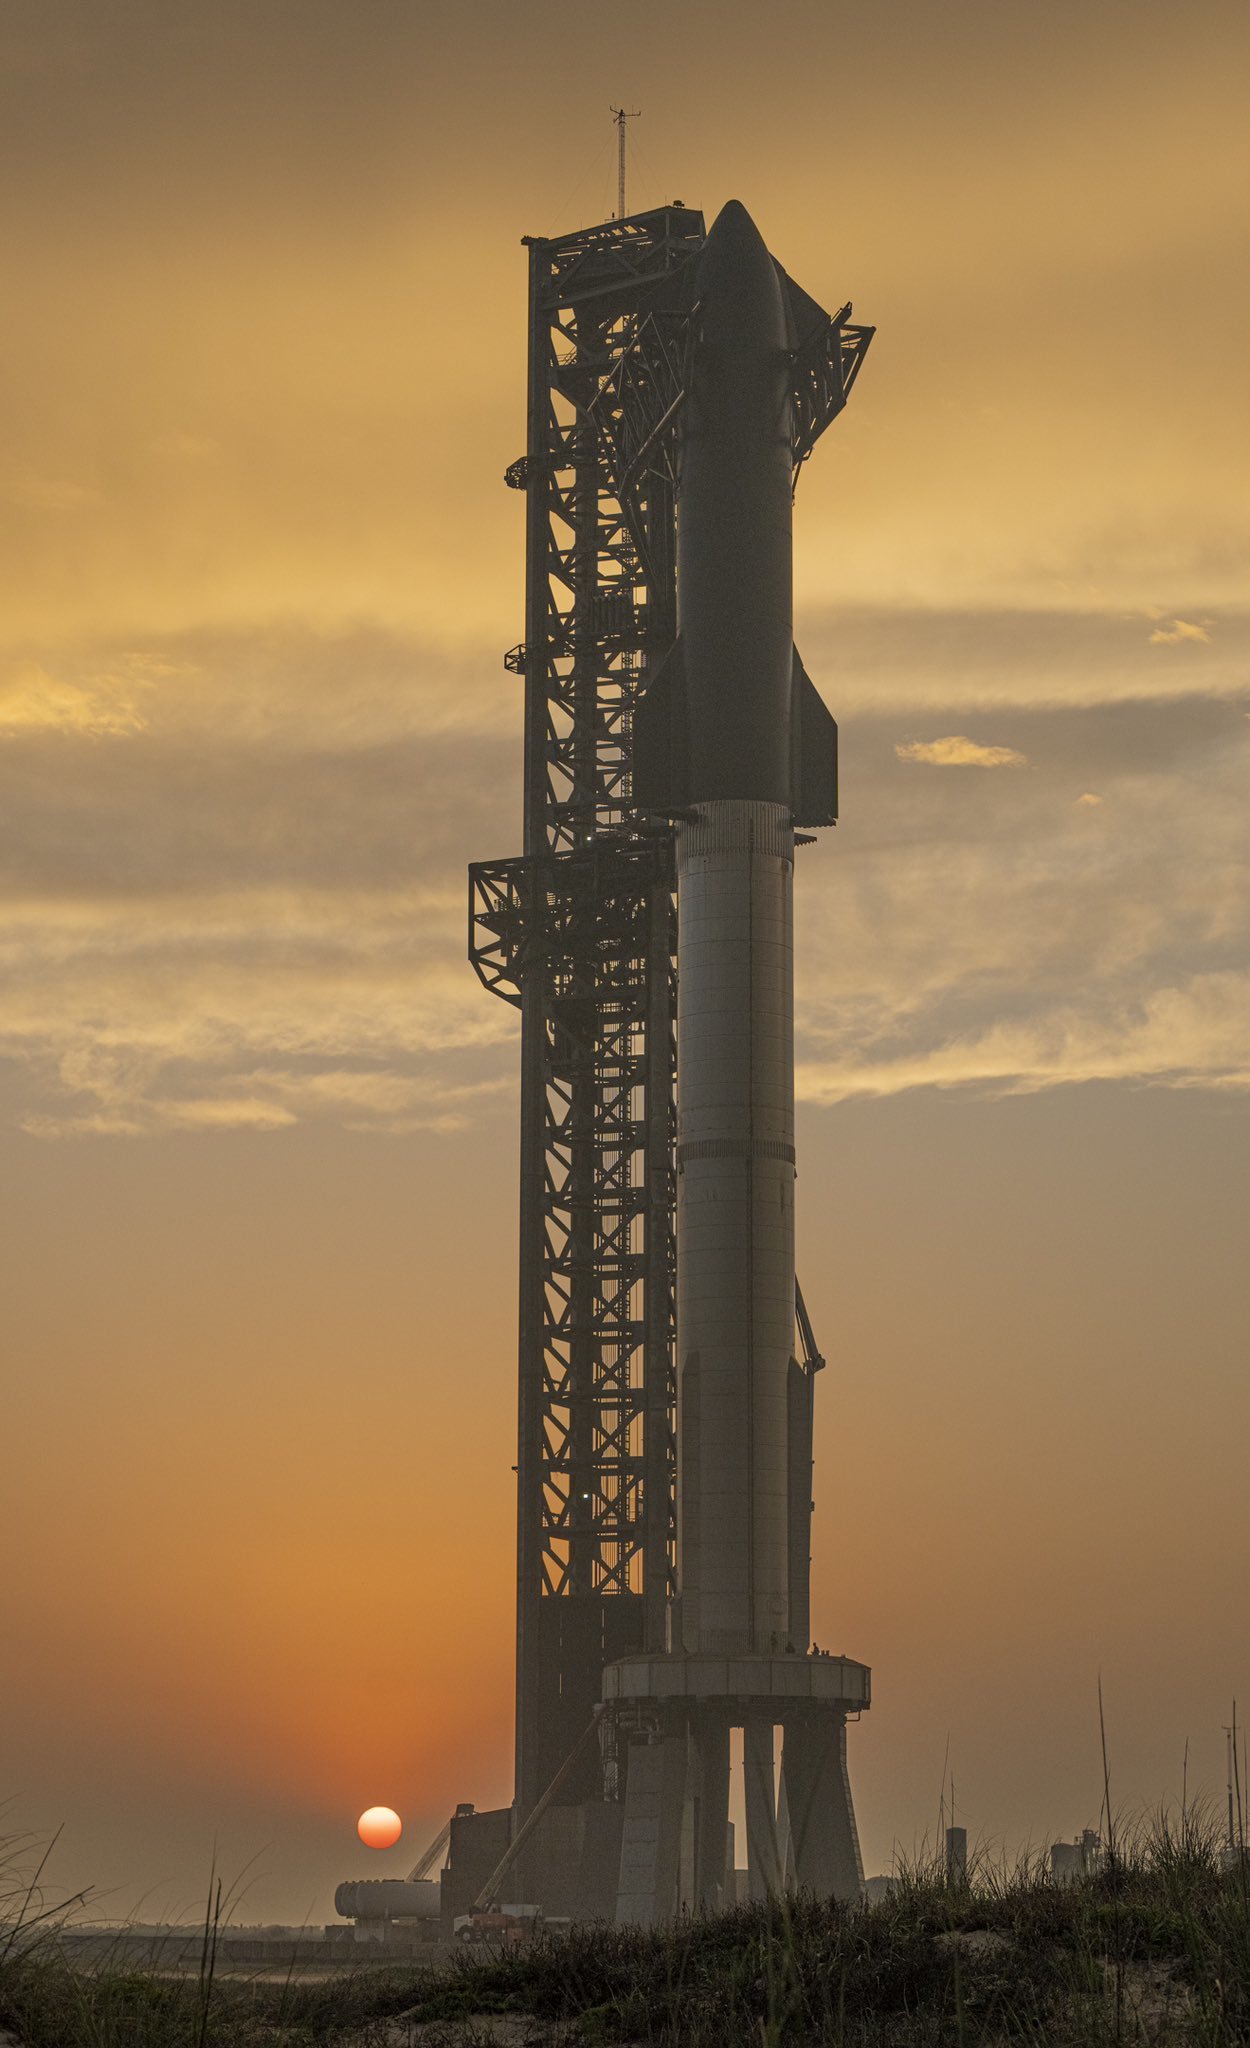 The world’s most powerful rocket will attempt to launch this afternoon